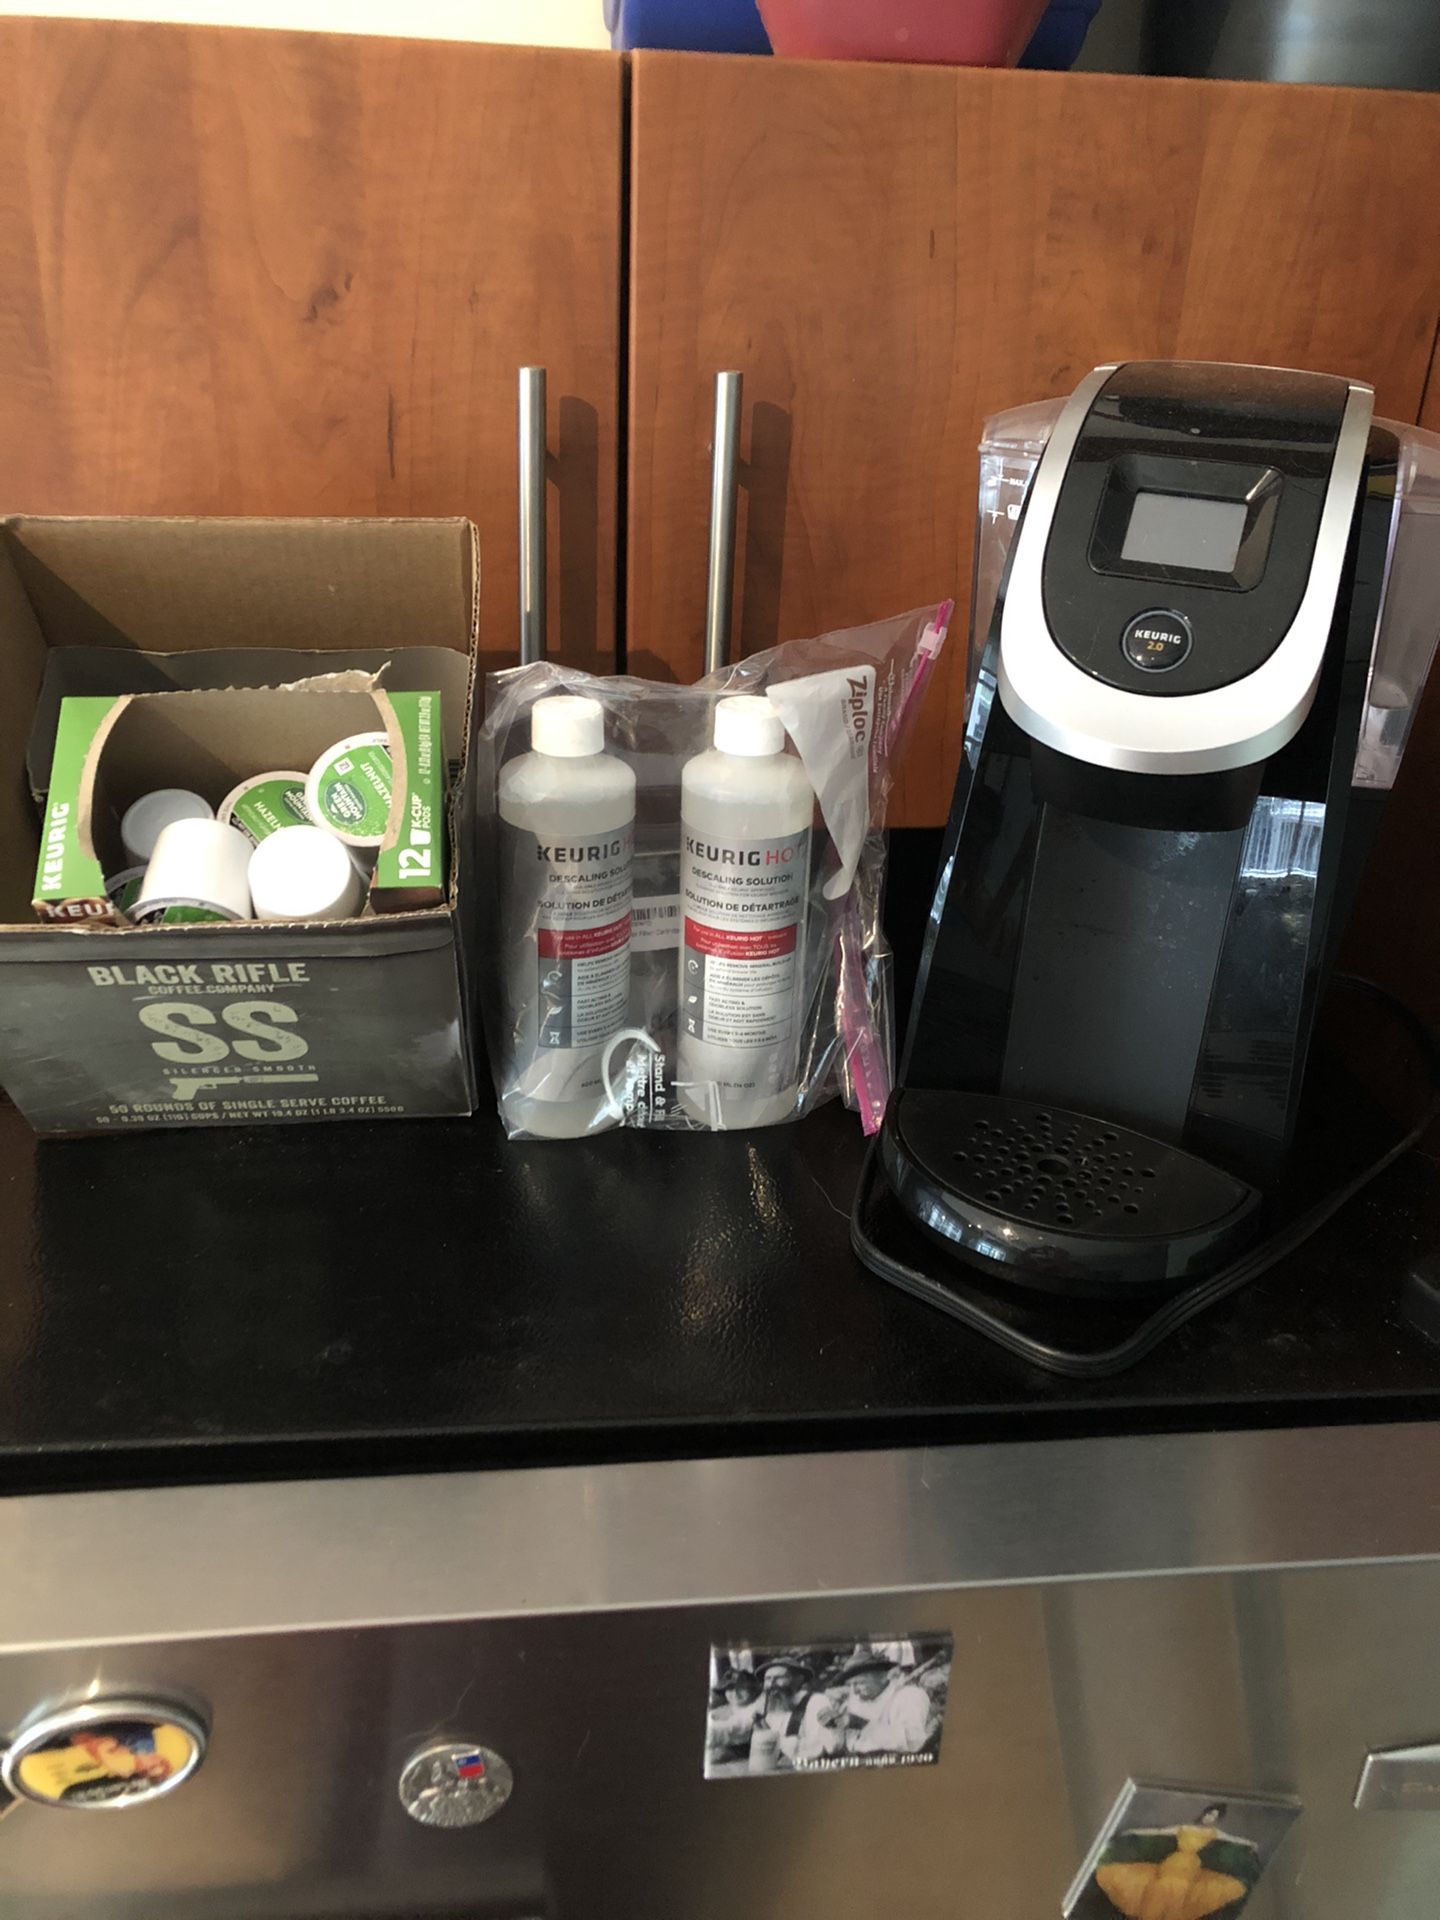 Brand new barely used Keurig 2.0 with cups and cleaner